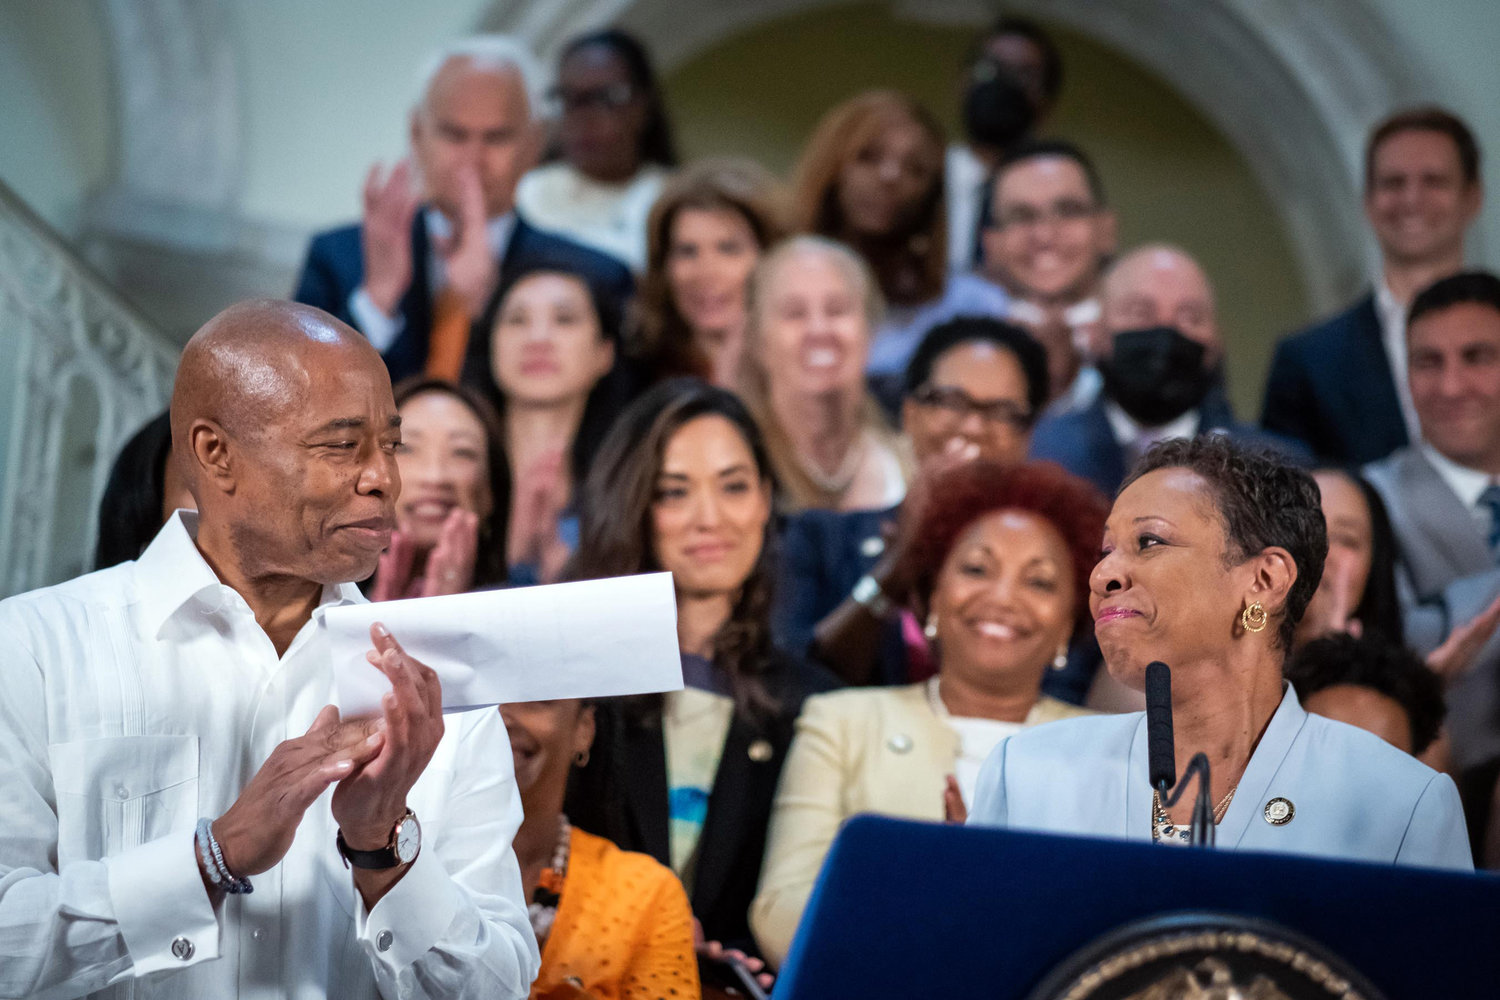 Everyone was all smiles when Mayor Eric Adams, New York City Council Speaker Adrienne Adams, New York City Council Finance Chair Justin Brannan, and members of the City Council announce an agreement for an early and balanced city budget for fiscal year 2023 on June 10.